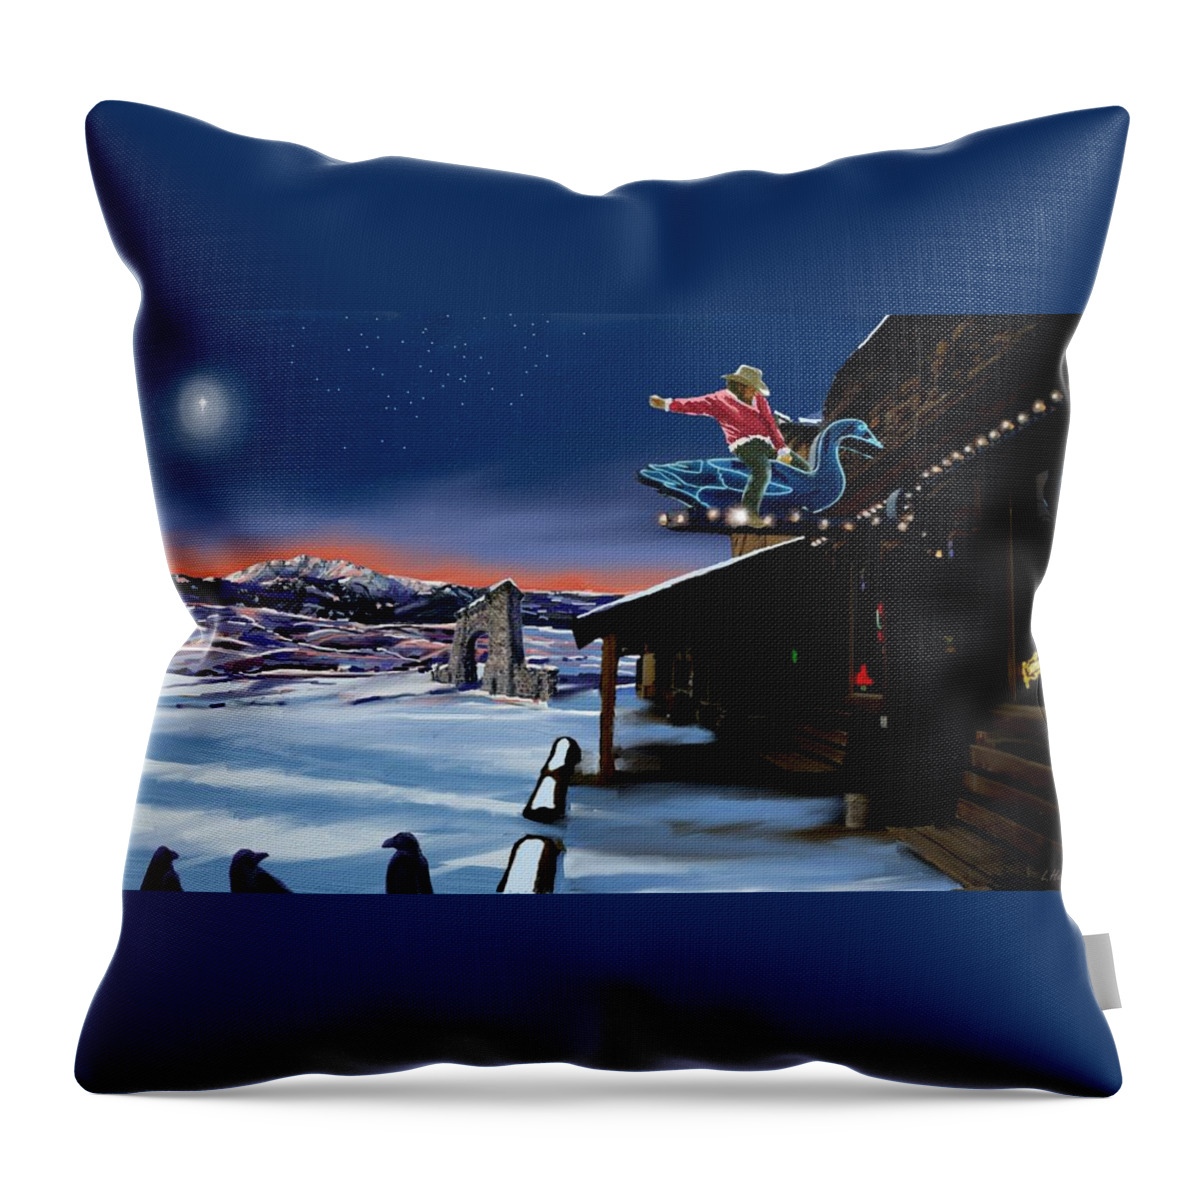 Point Throw Pillow featuring the digital art Point's Goose Ride by Les Herman